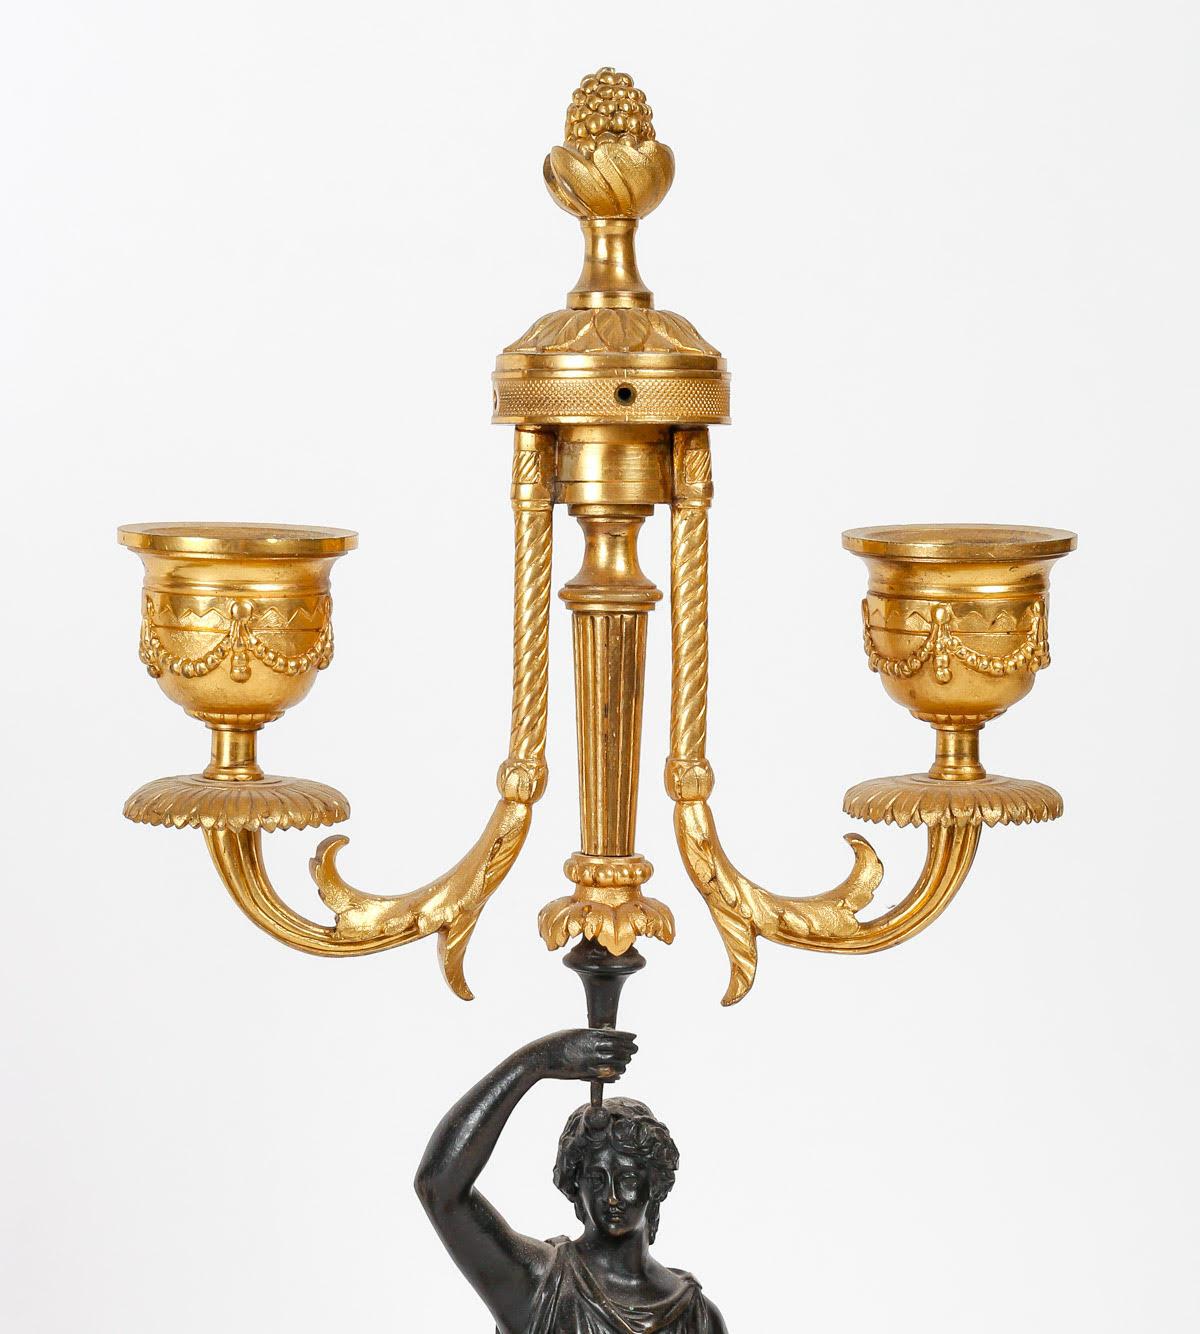  Pair of Candelabras in Patinated and Gilded Bronze, Charles X Period. For Sale 2